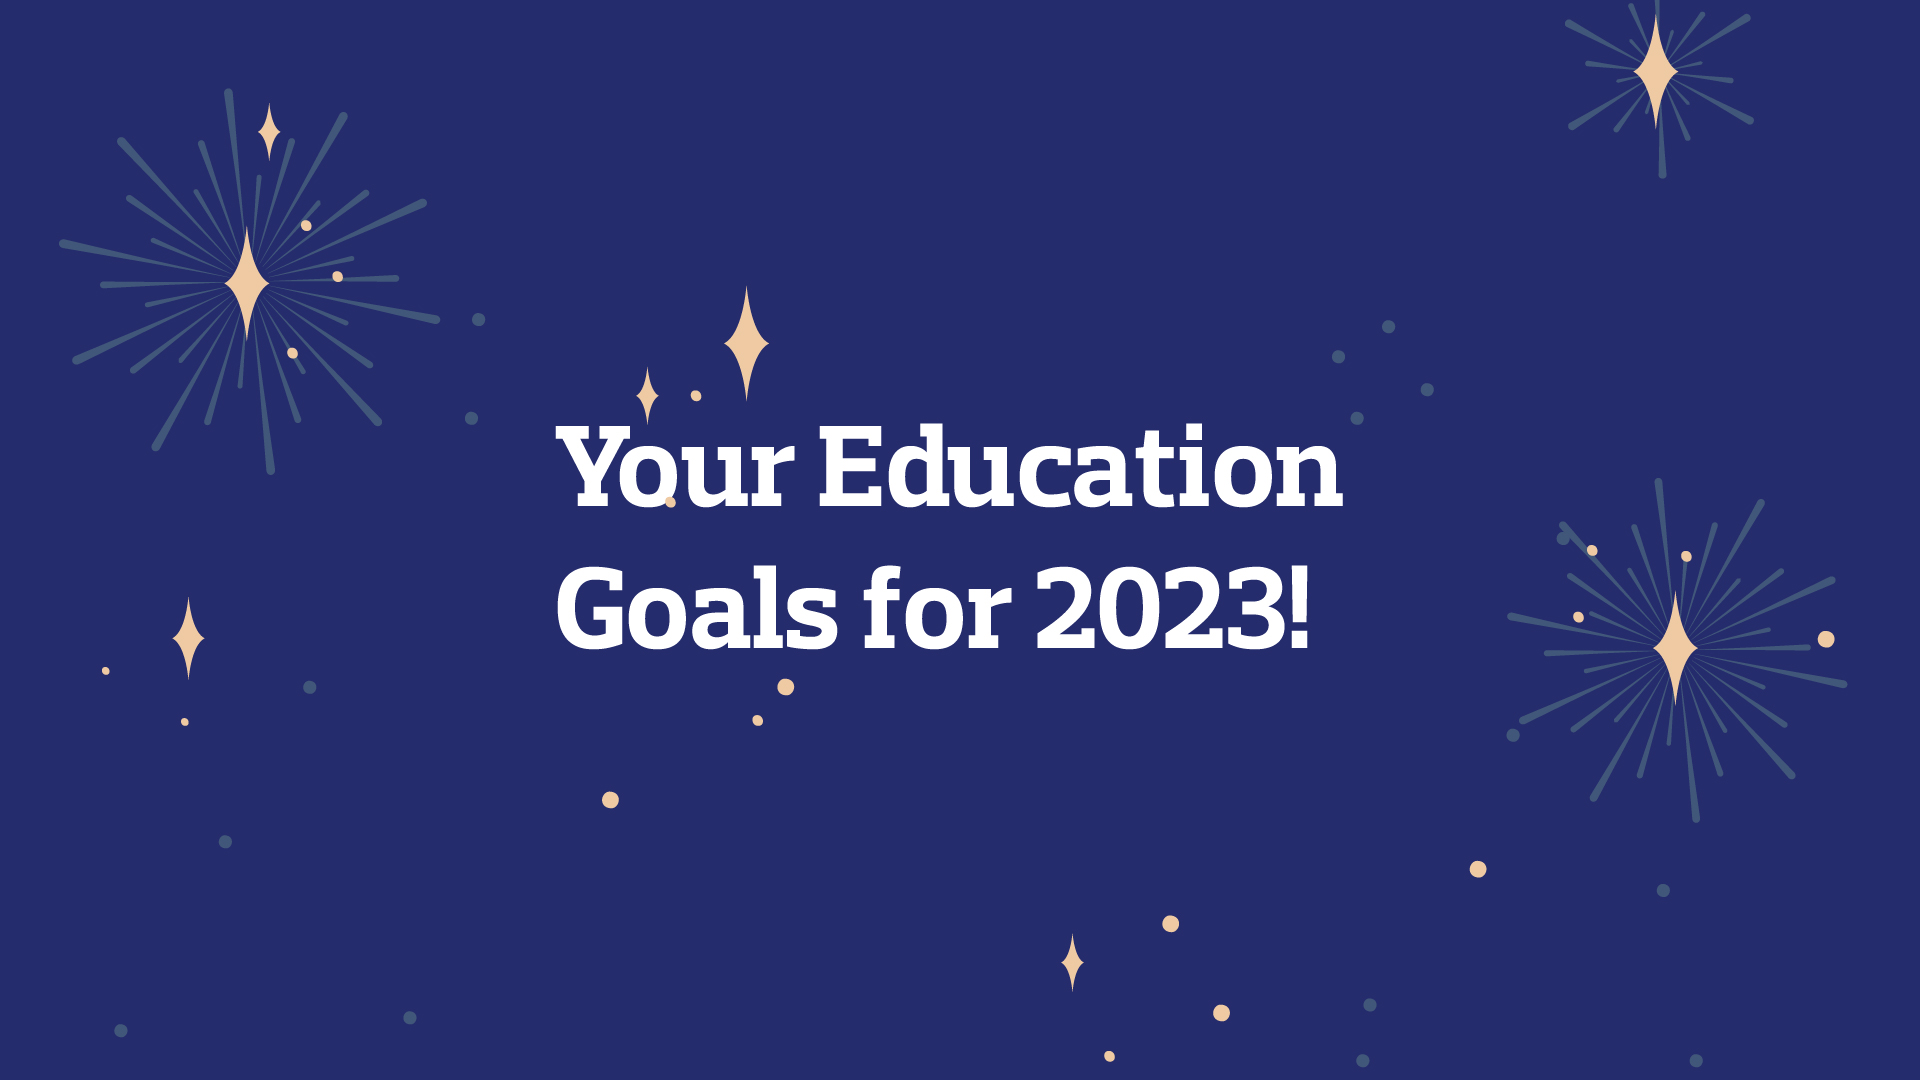 Your Education Goals for 2023